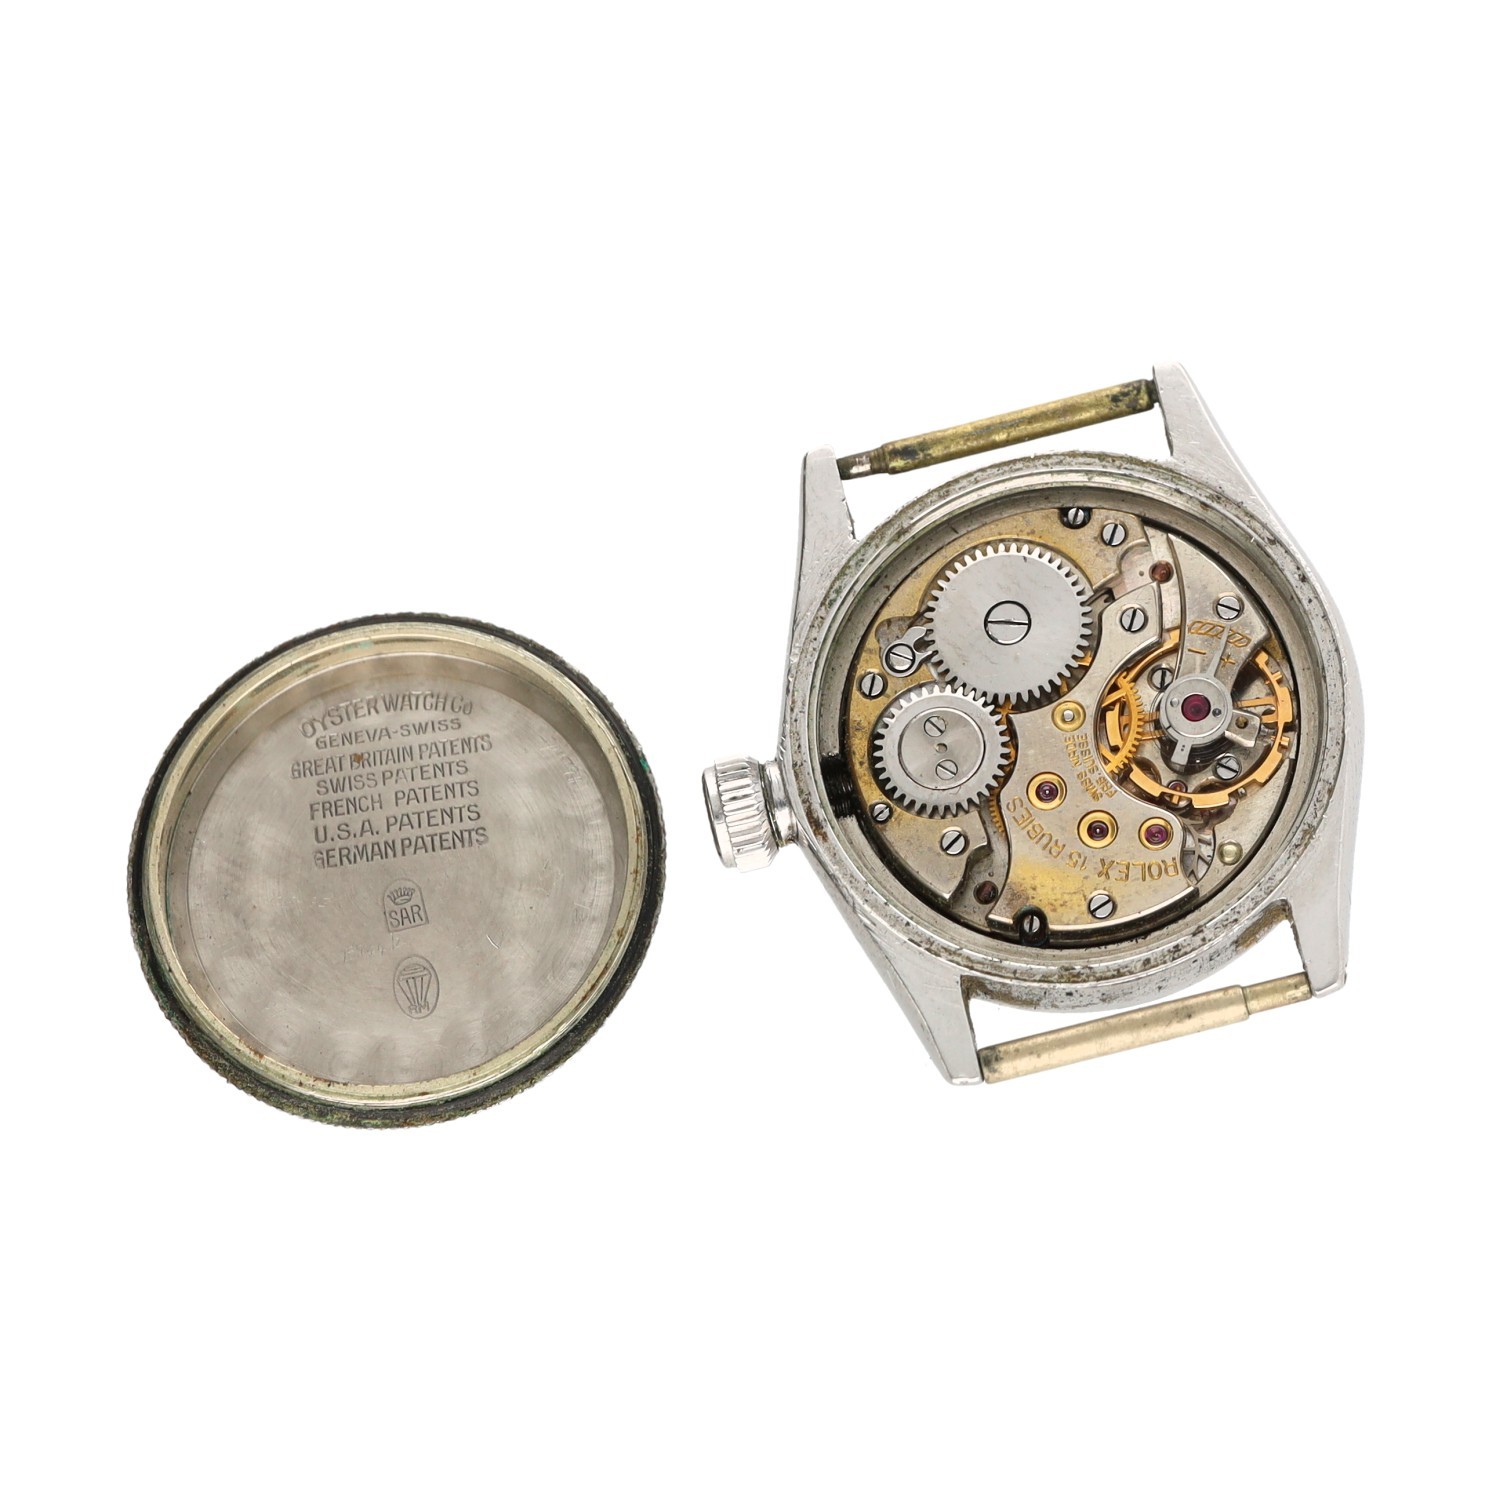 Rolex Oyster Royal mid-size stainless steel gentleman's wristwatch, serial no. 73xxx, circa 1954, - Image 3 of 3